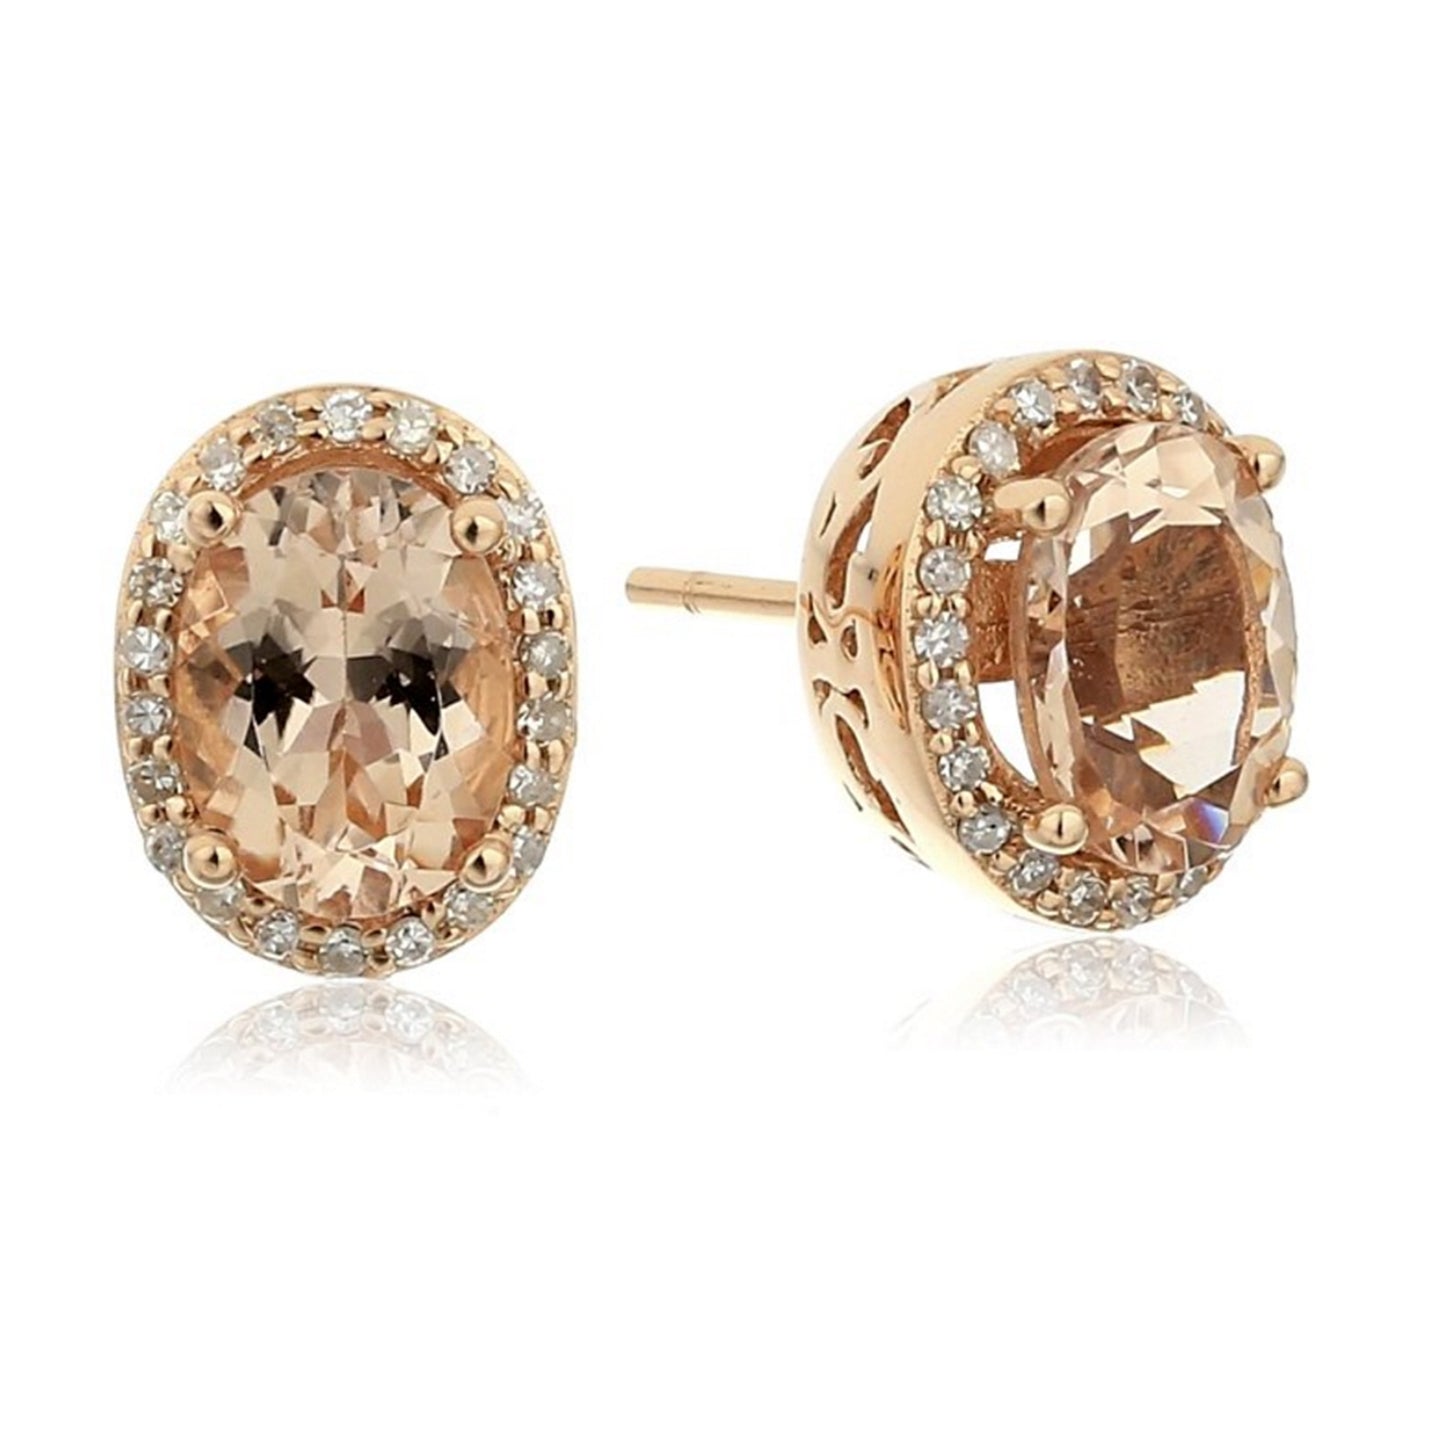 14k Rose Gold Morganite and Diamond Stud Earrings (1/5 cttw, H-I Color, I1-I2 Clarity) - pinctore